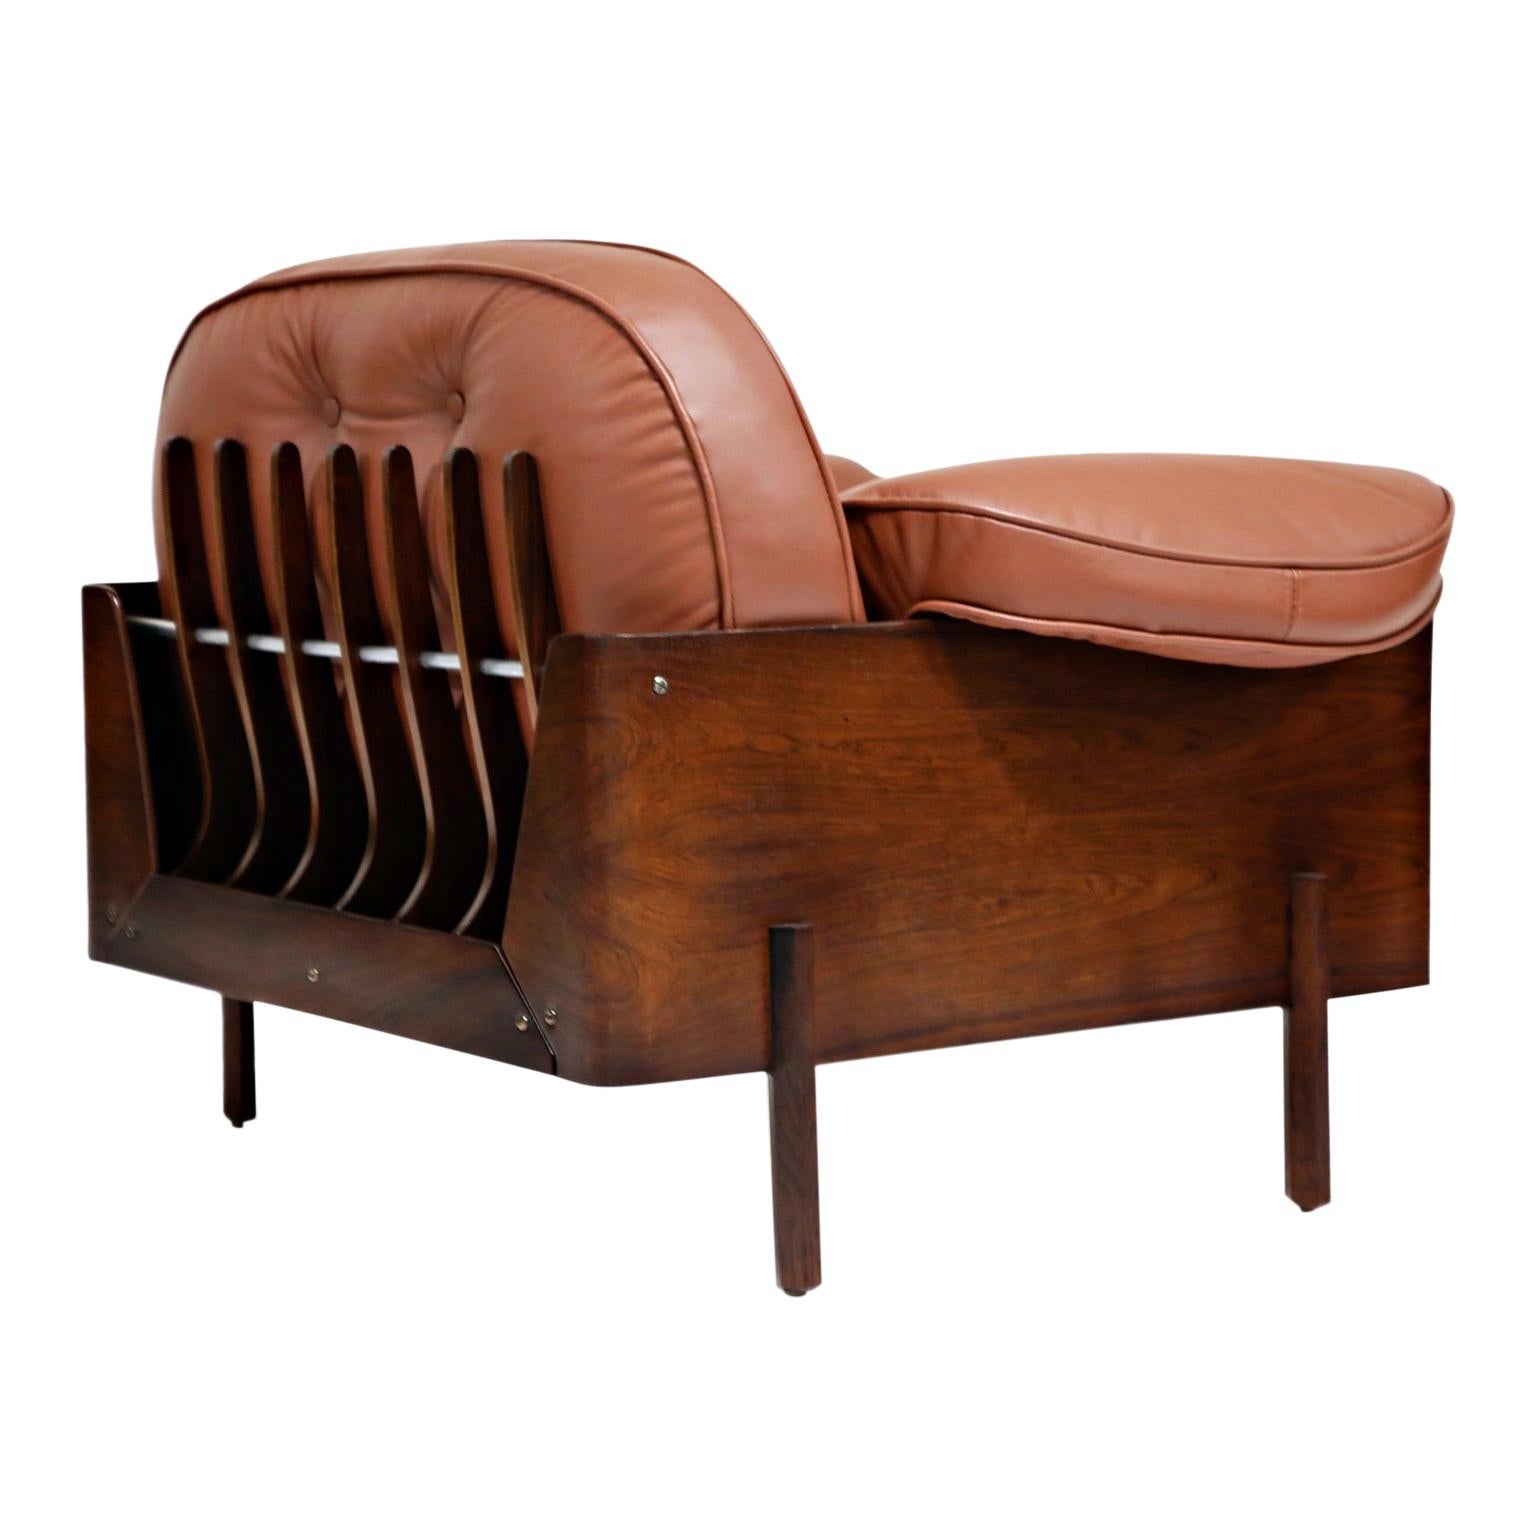 J.D. Moveis e Decoracoes Brazilian Rosewood and Leather Lounge Chair, 1960s